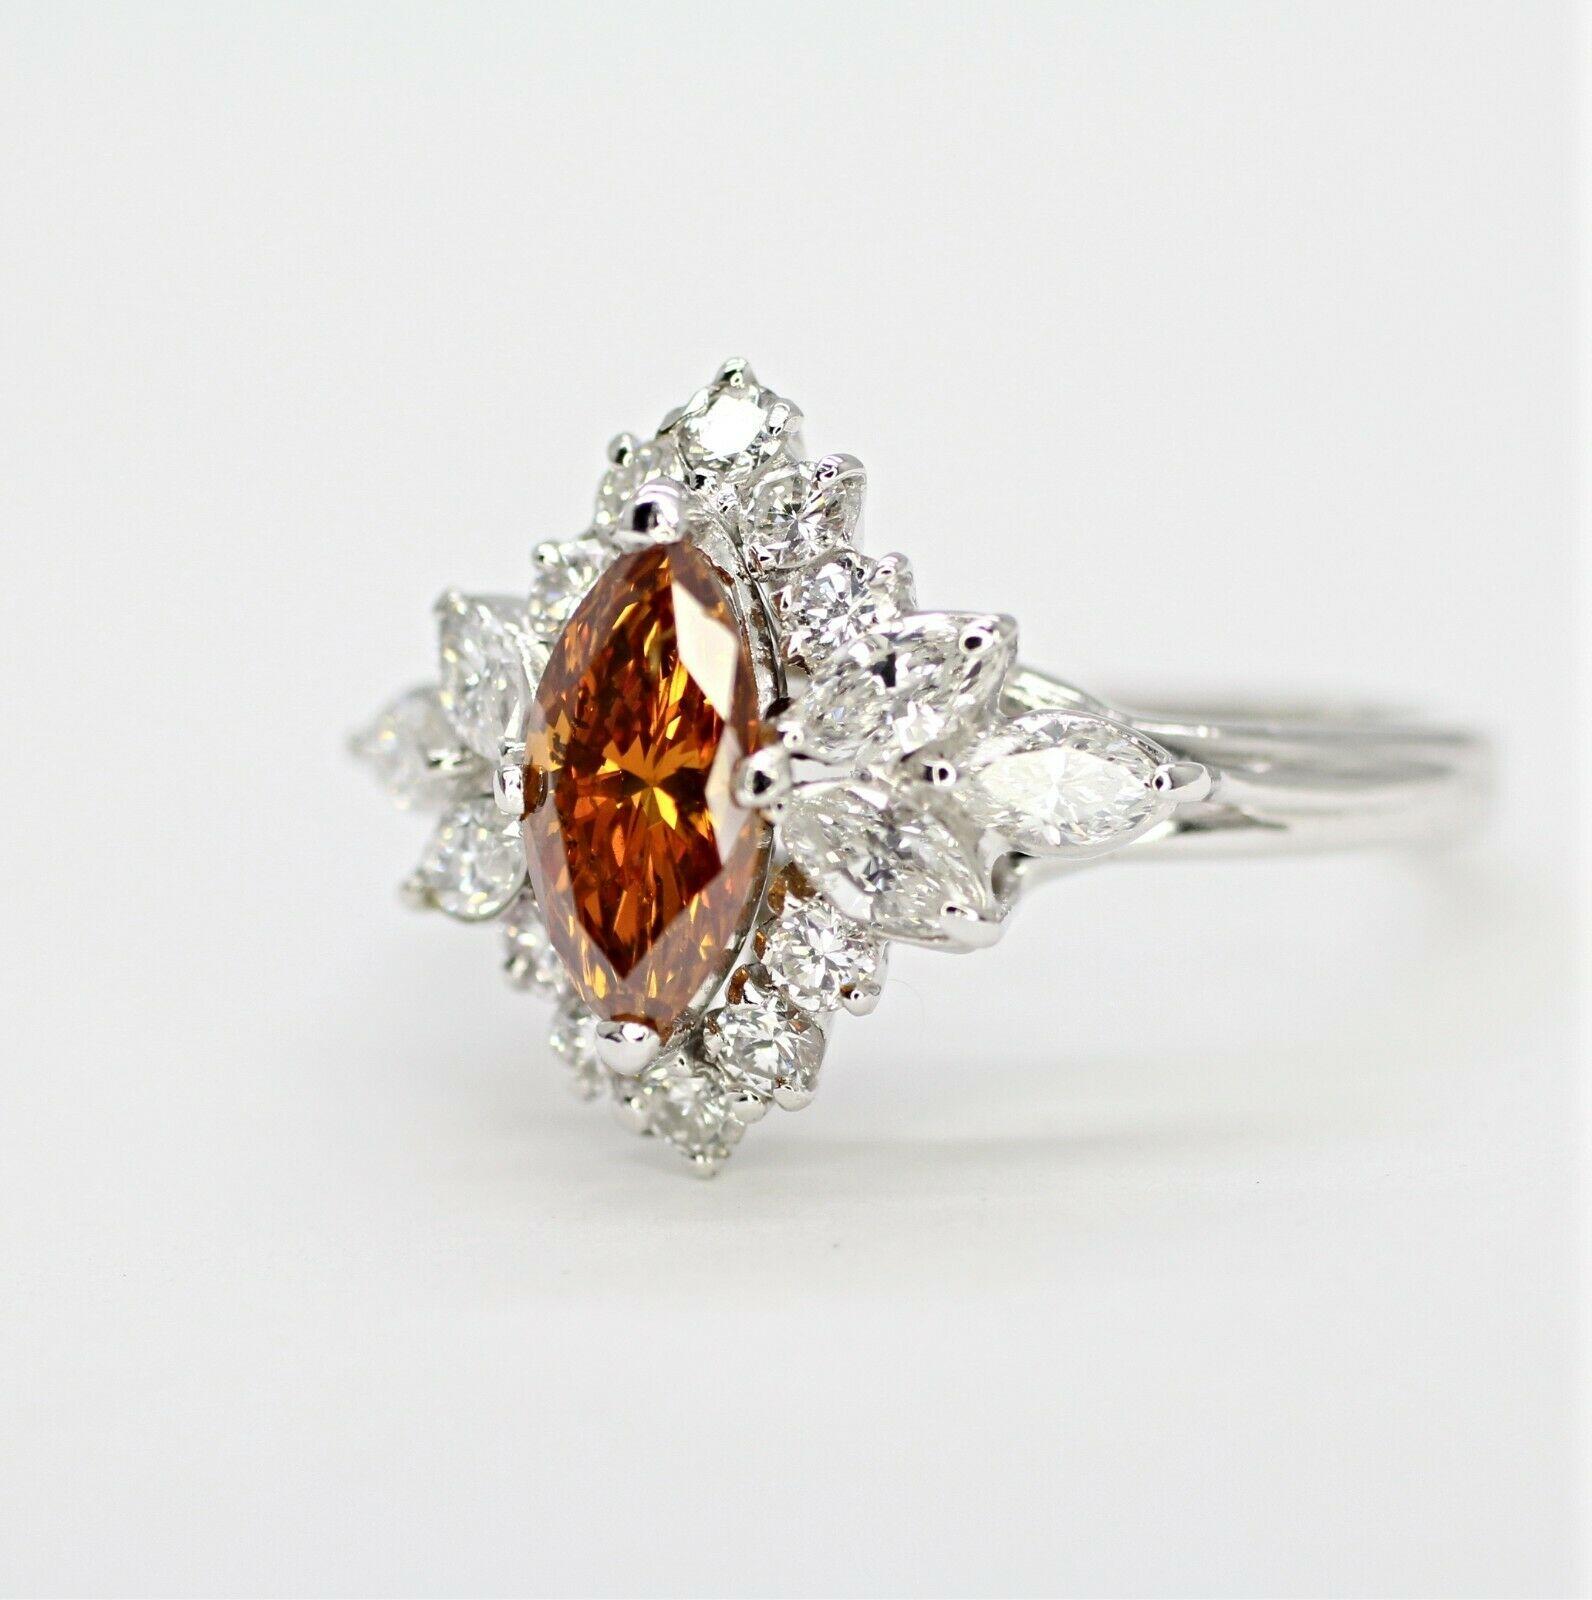  This is an antique platinum ring certified by EGLUSA. The center stone is a Marquise Brilliant Fancy orangy-brown color, SI2 in clarity, and approximately 0.65 carat weight. This ring also contains 10 pieces round brilliant cut diamonds weighing